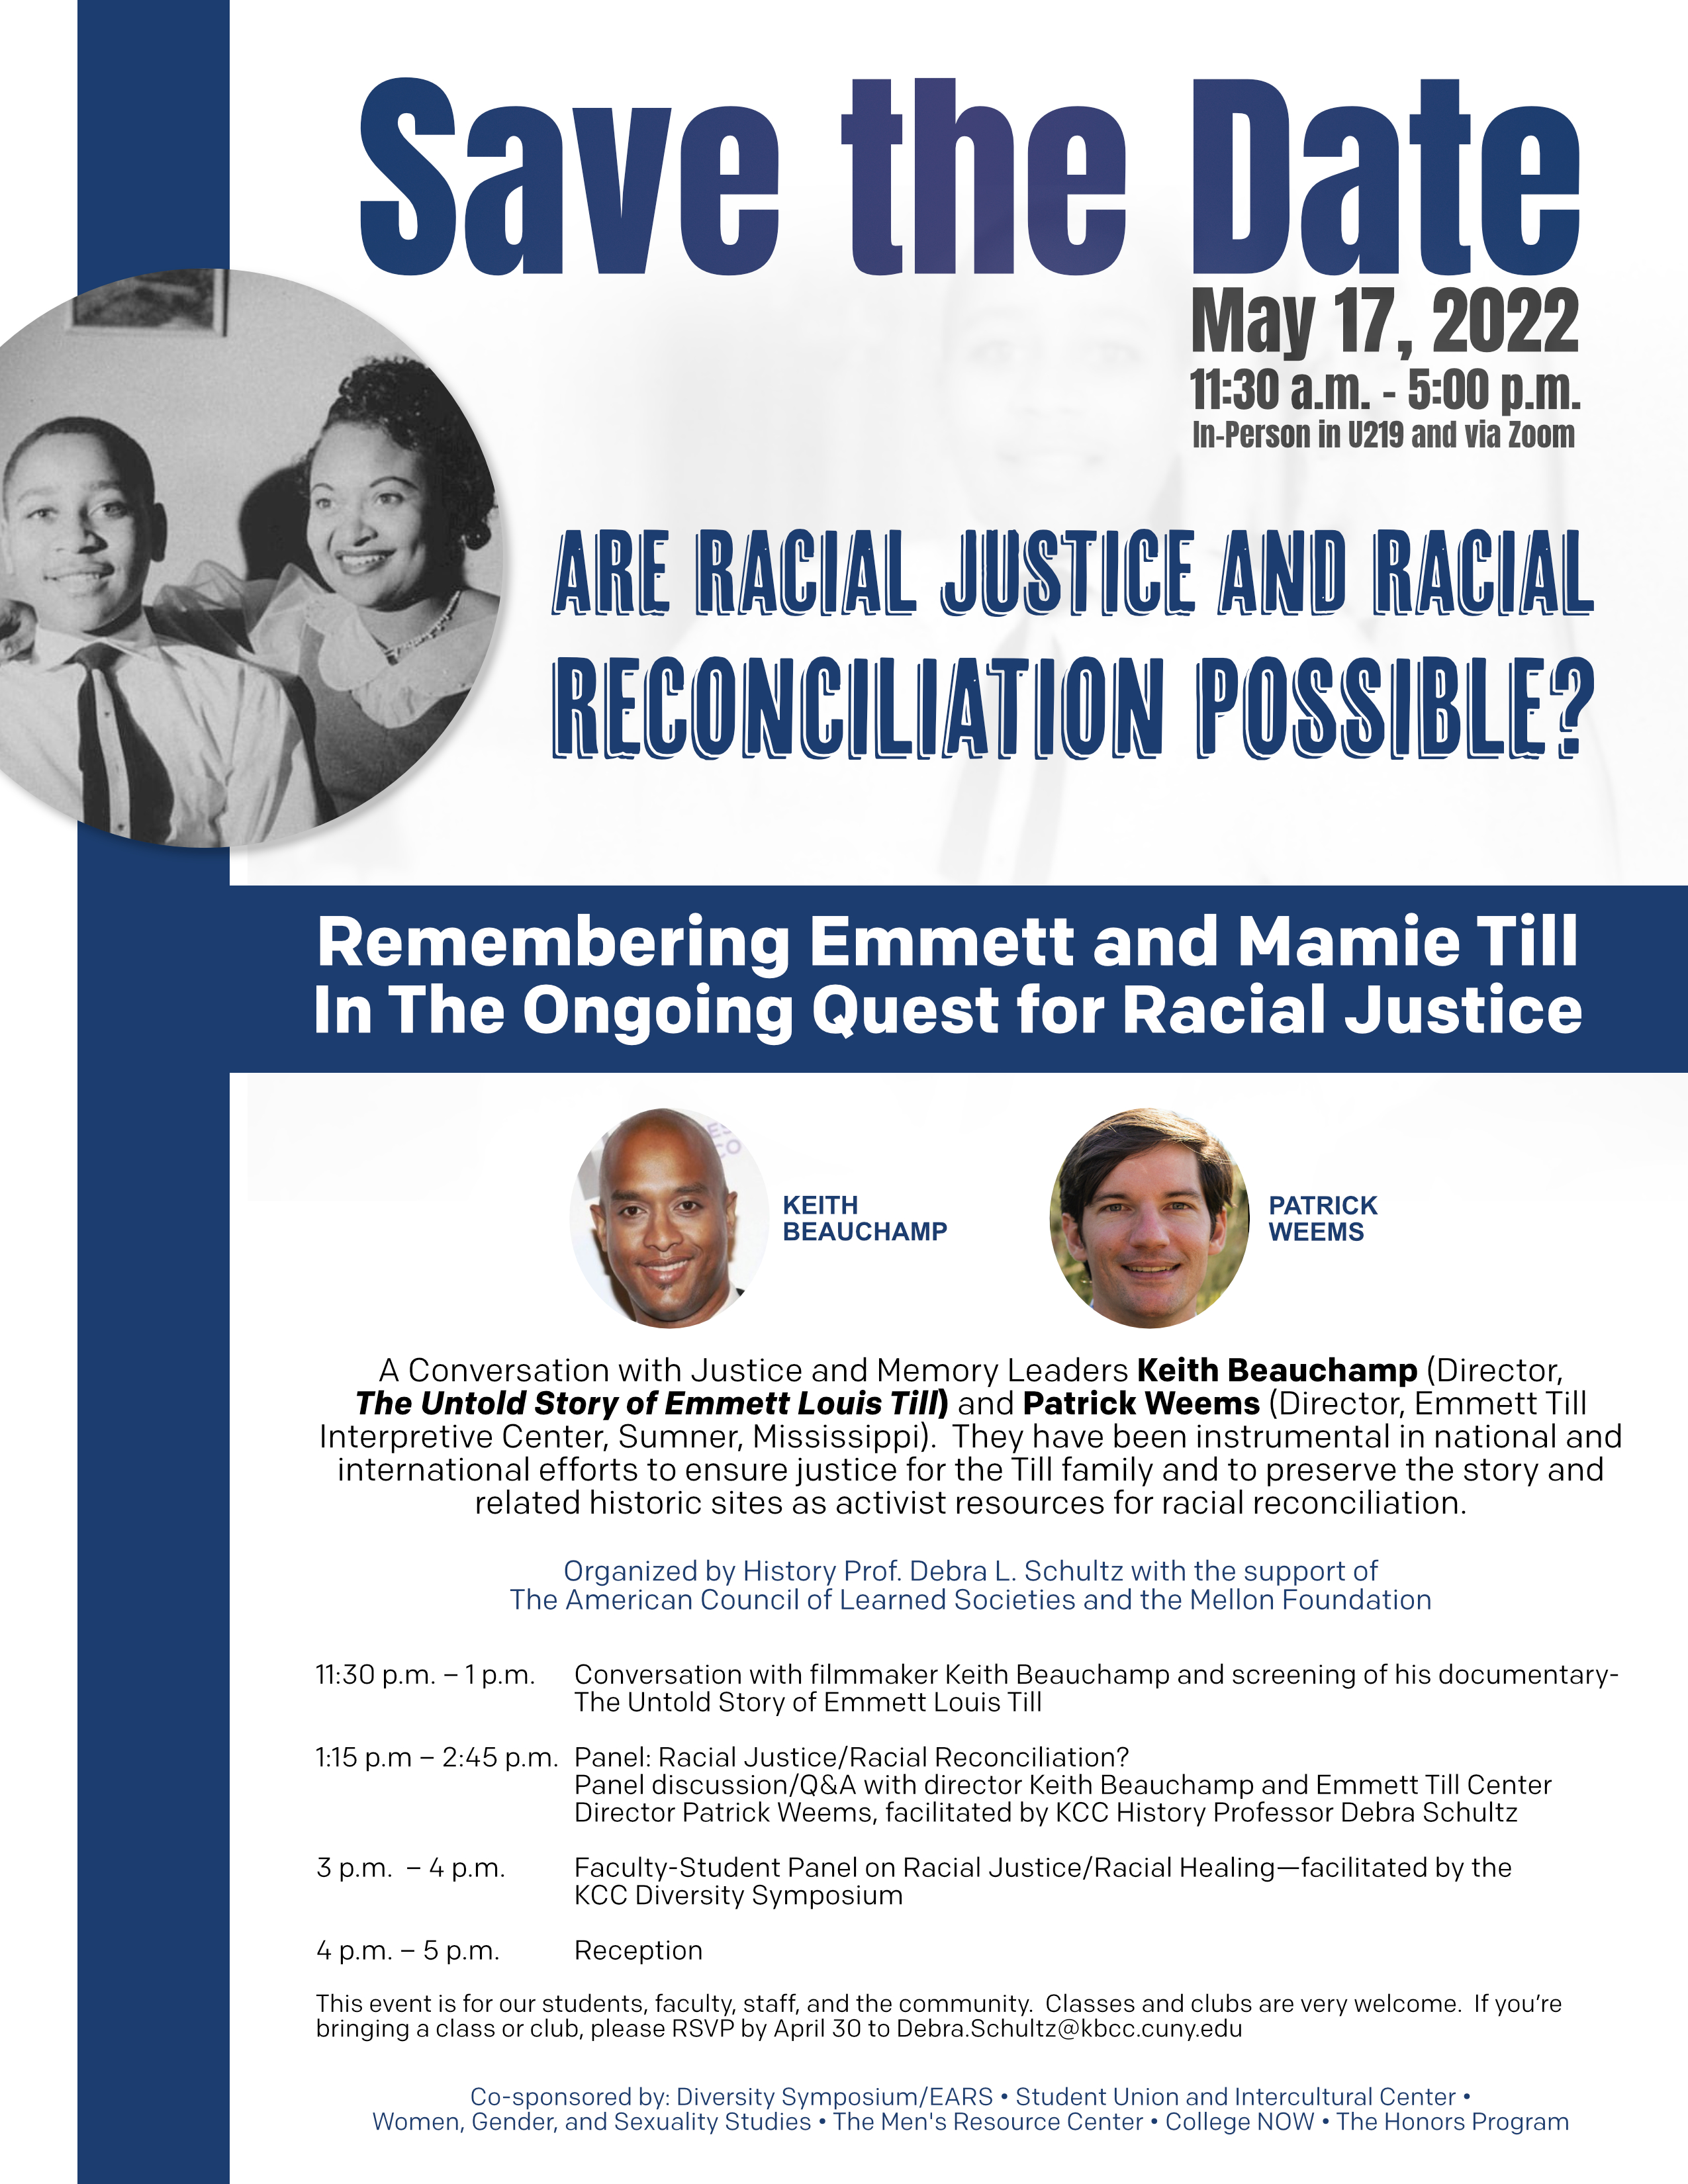 Are Racial Justice And Racial Reconciliation Possible?